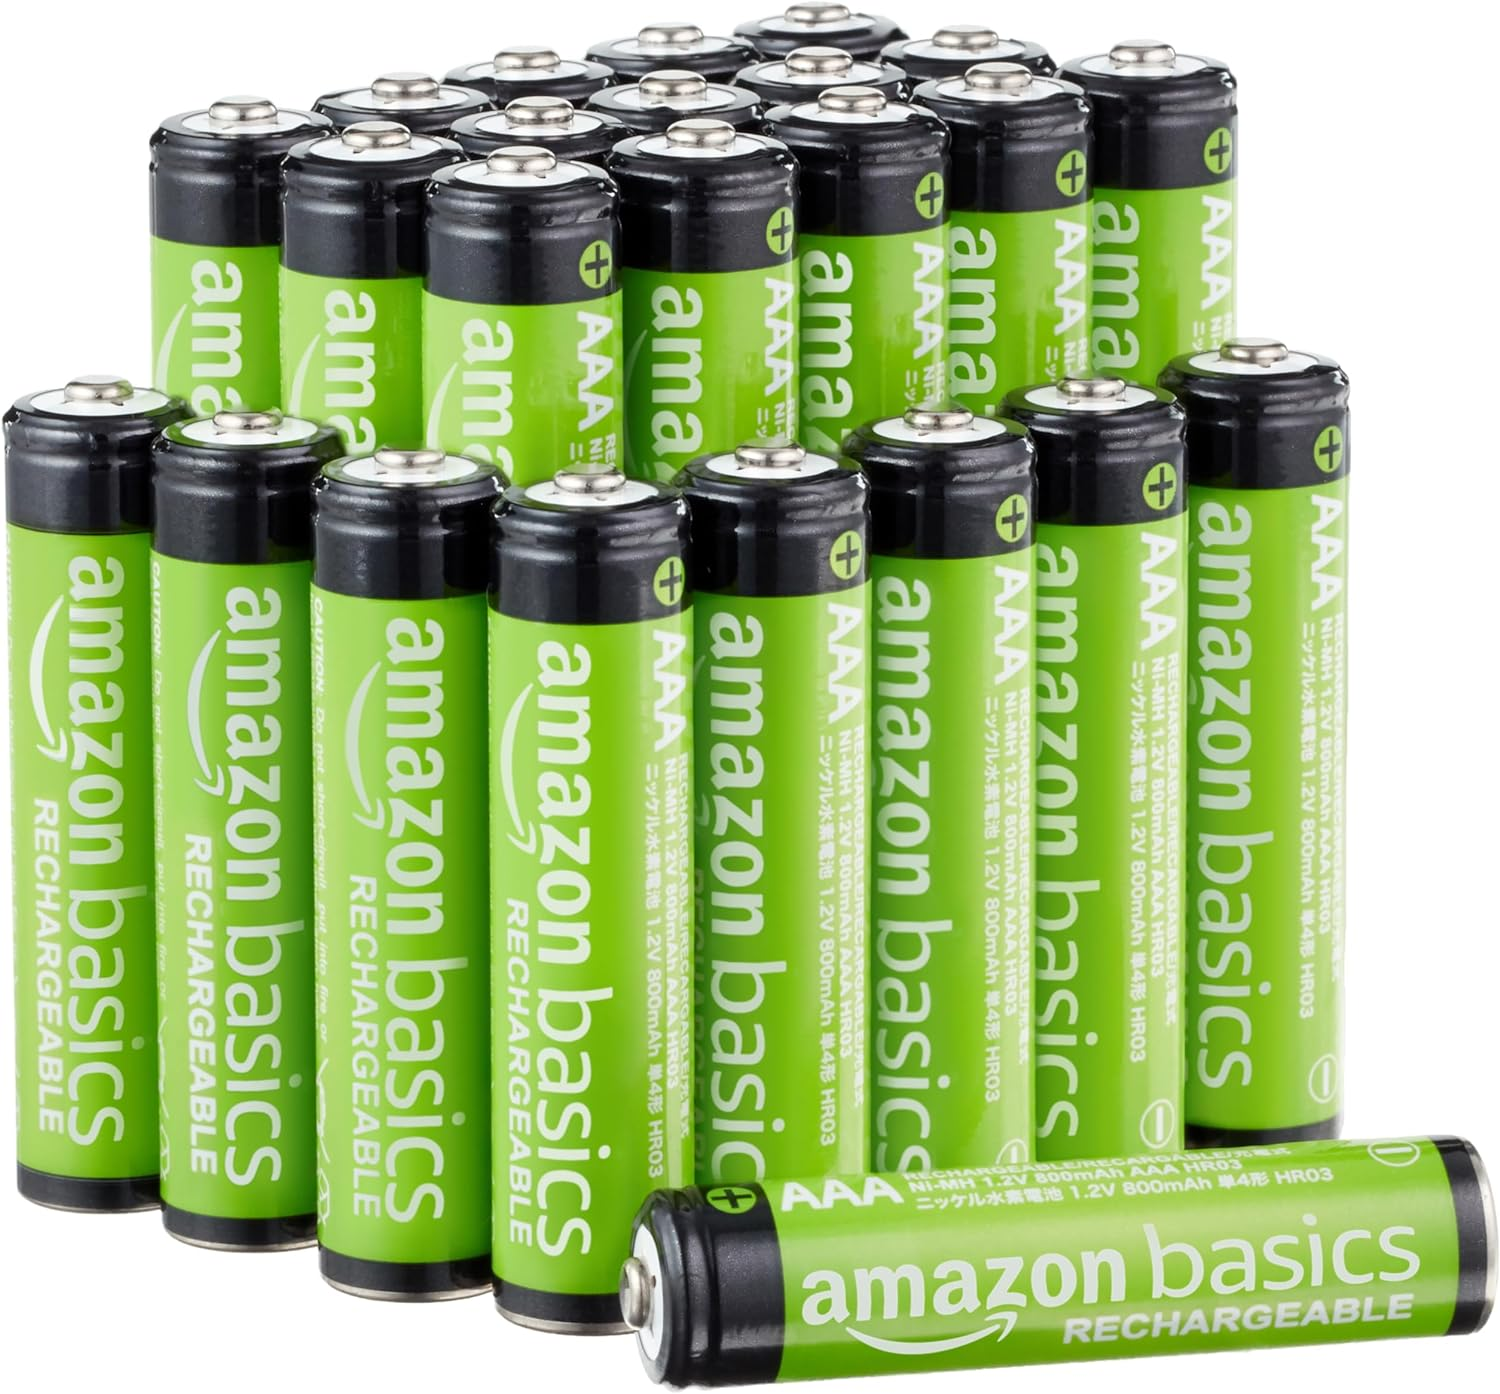 Amazon.com: Amazon Basics 24-Pack Rechargeable AAA NiMH Performance Batteries, 800 mAh, Recharge up to 1000x Times, Pre-Charged : Health & Household $15.33